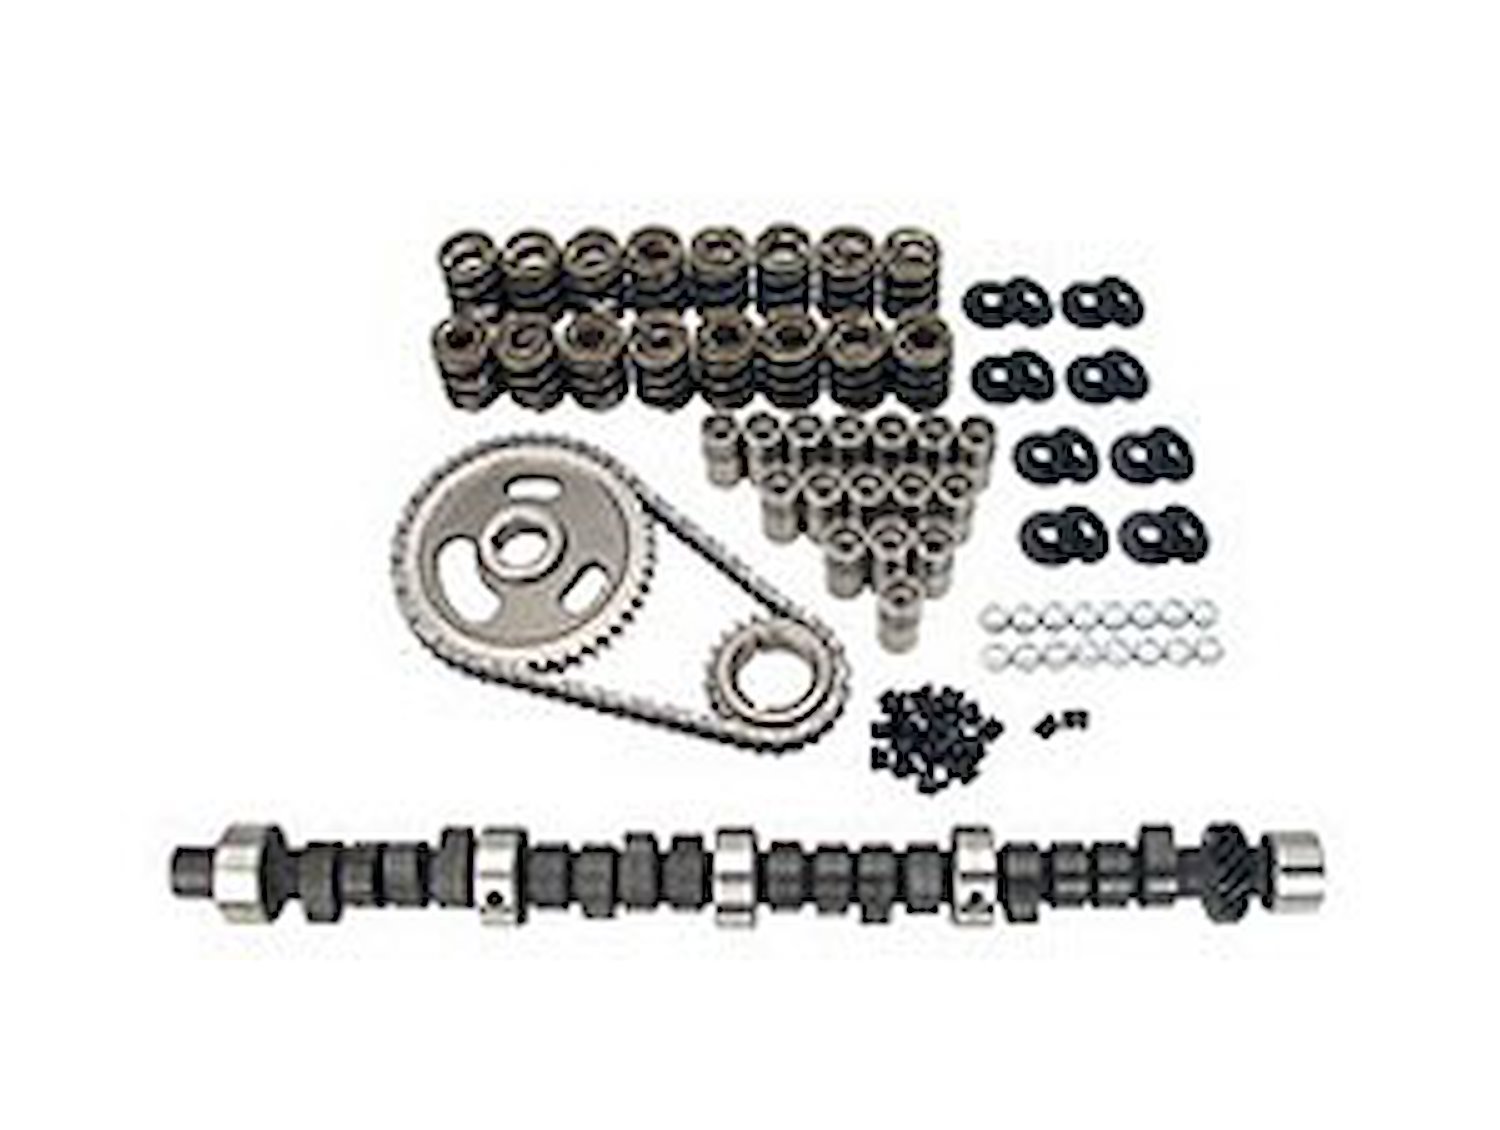 High Energy 268H Hydraulic Flat Tappet Camshaft Complete Kit Lift: .456" /.456" Duration: 268°/268° RPM Range: 1500-5500